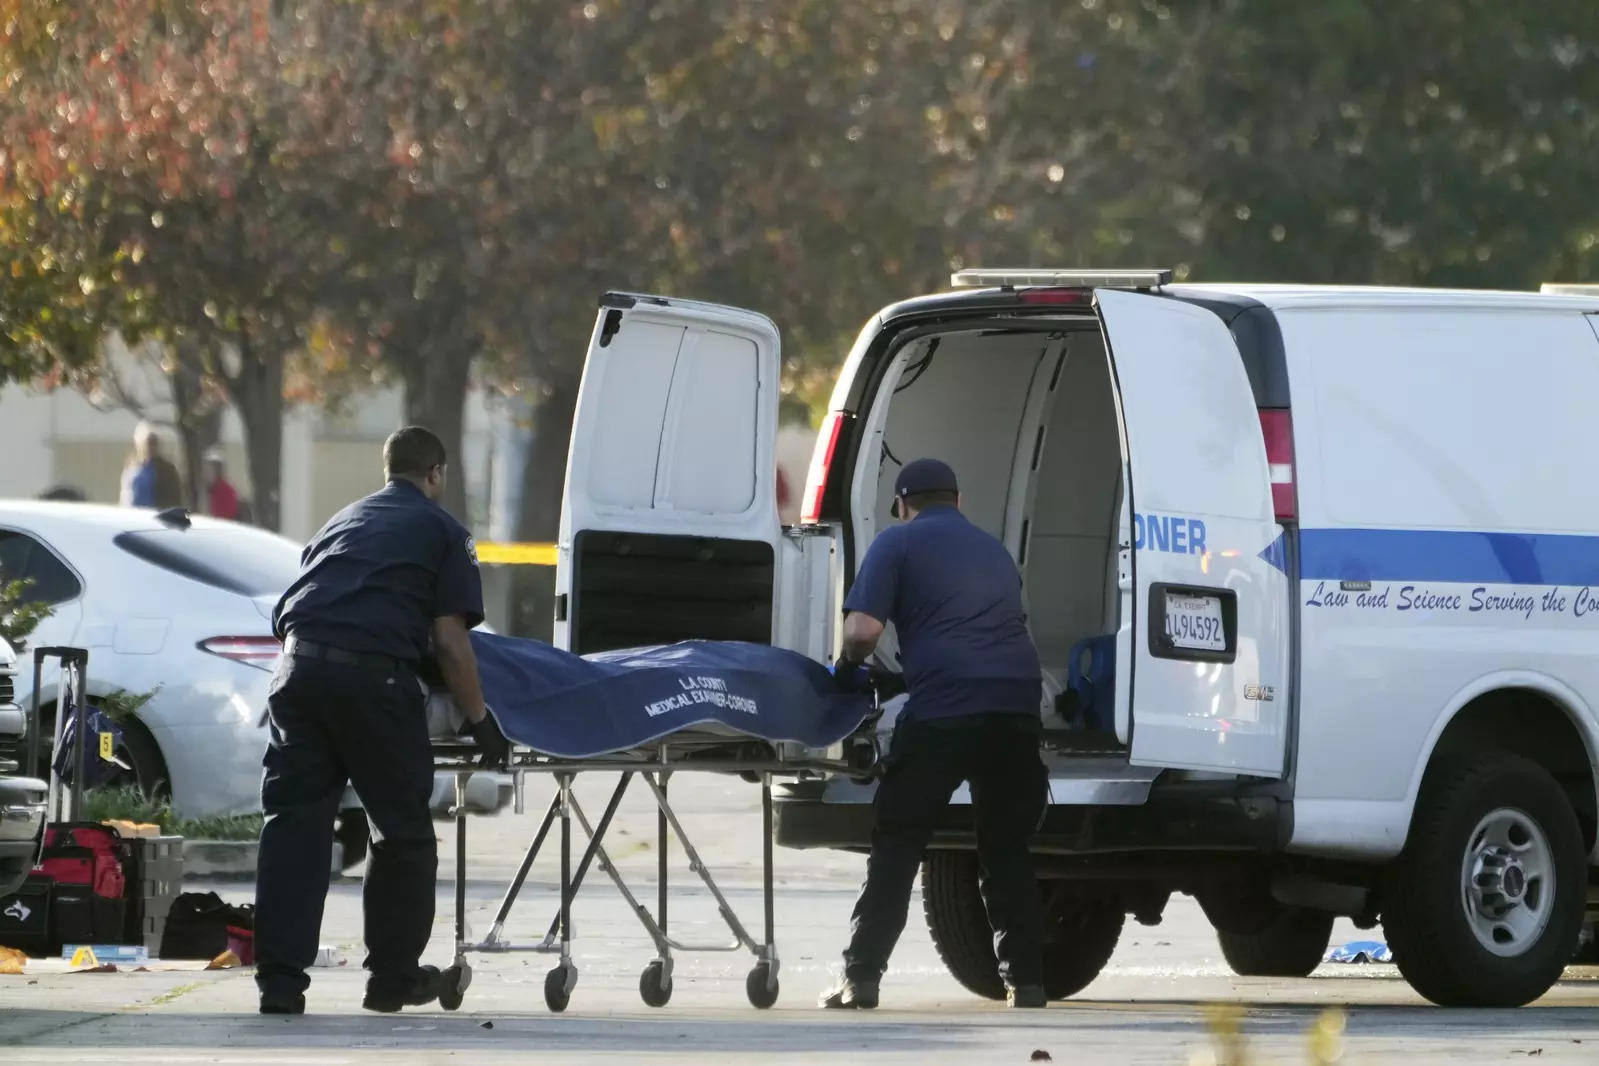 10 killed in mass shooting at Monterey Park in California